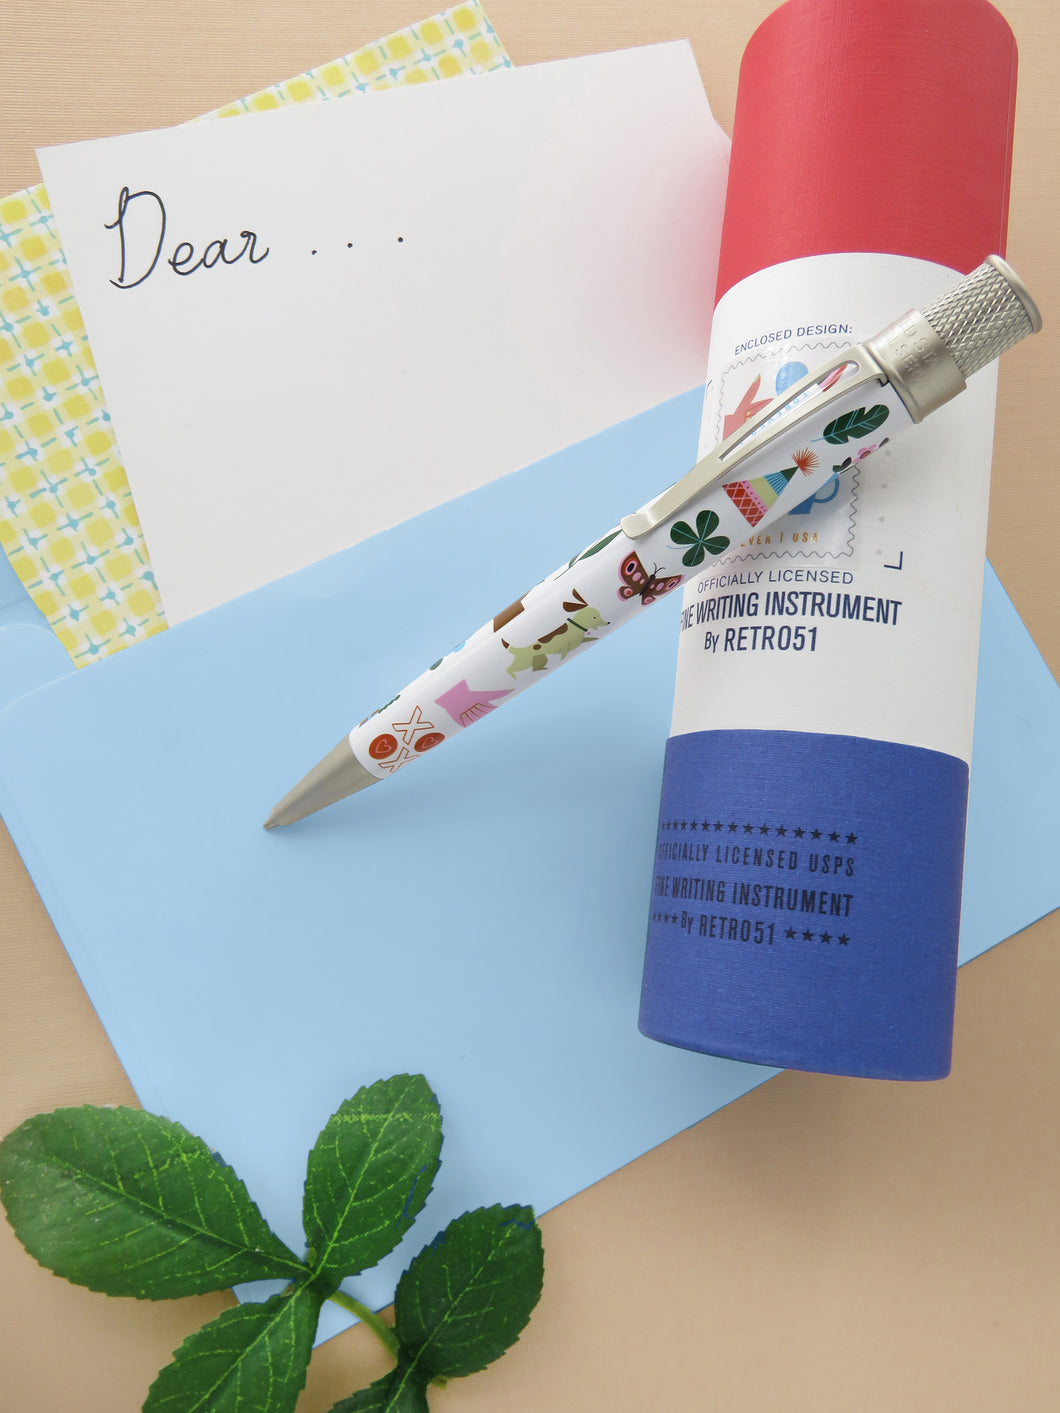 Retro 51 USPS® Thinking of You Stamp 2023 Rollerball Pen with Presentation Tube, and giftcard background.